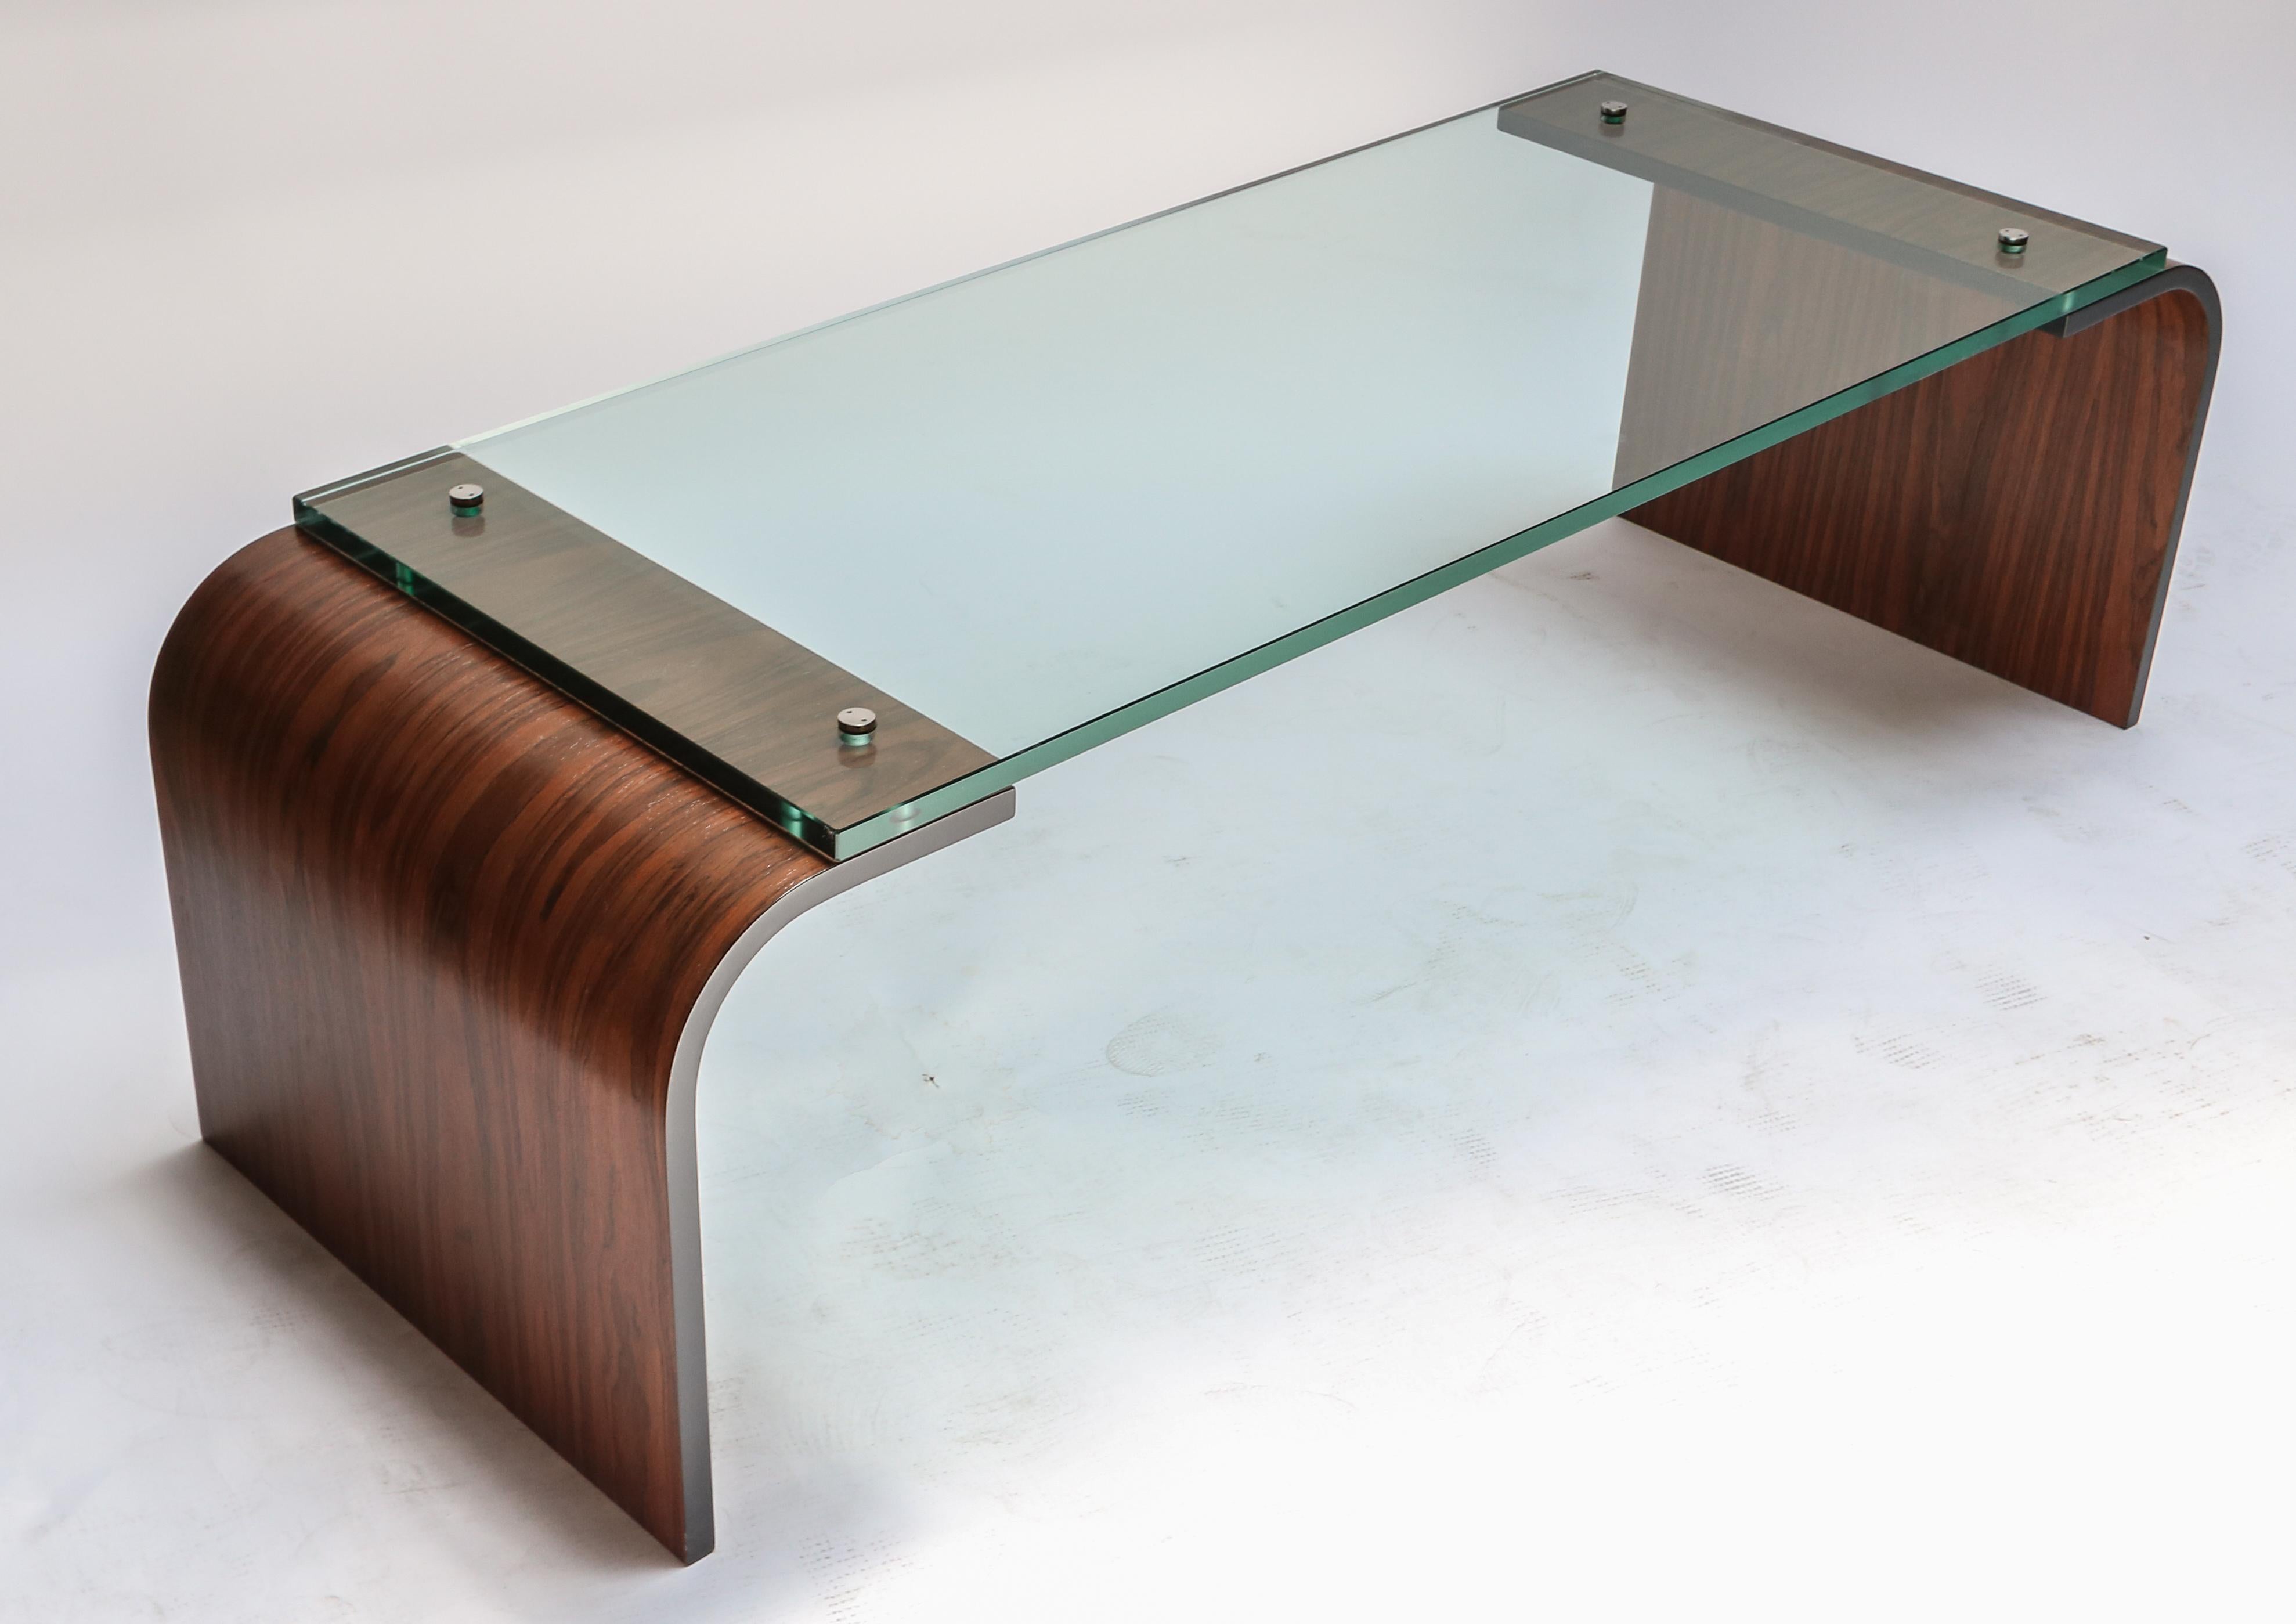 Custom coffee table with curved rosewood ends and glass top attached with handmade decorative metal screws.  Made in Los Angeles by Adesso Imports.

Can be done in different sizes and finishes. Priced individually.